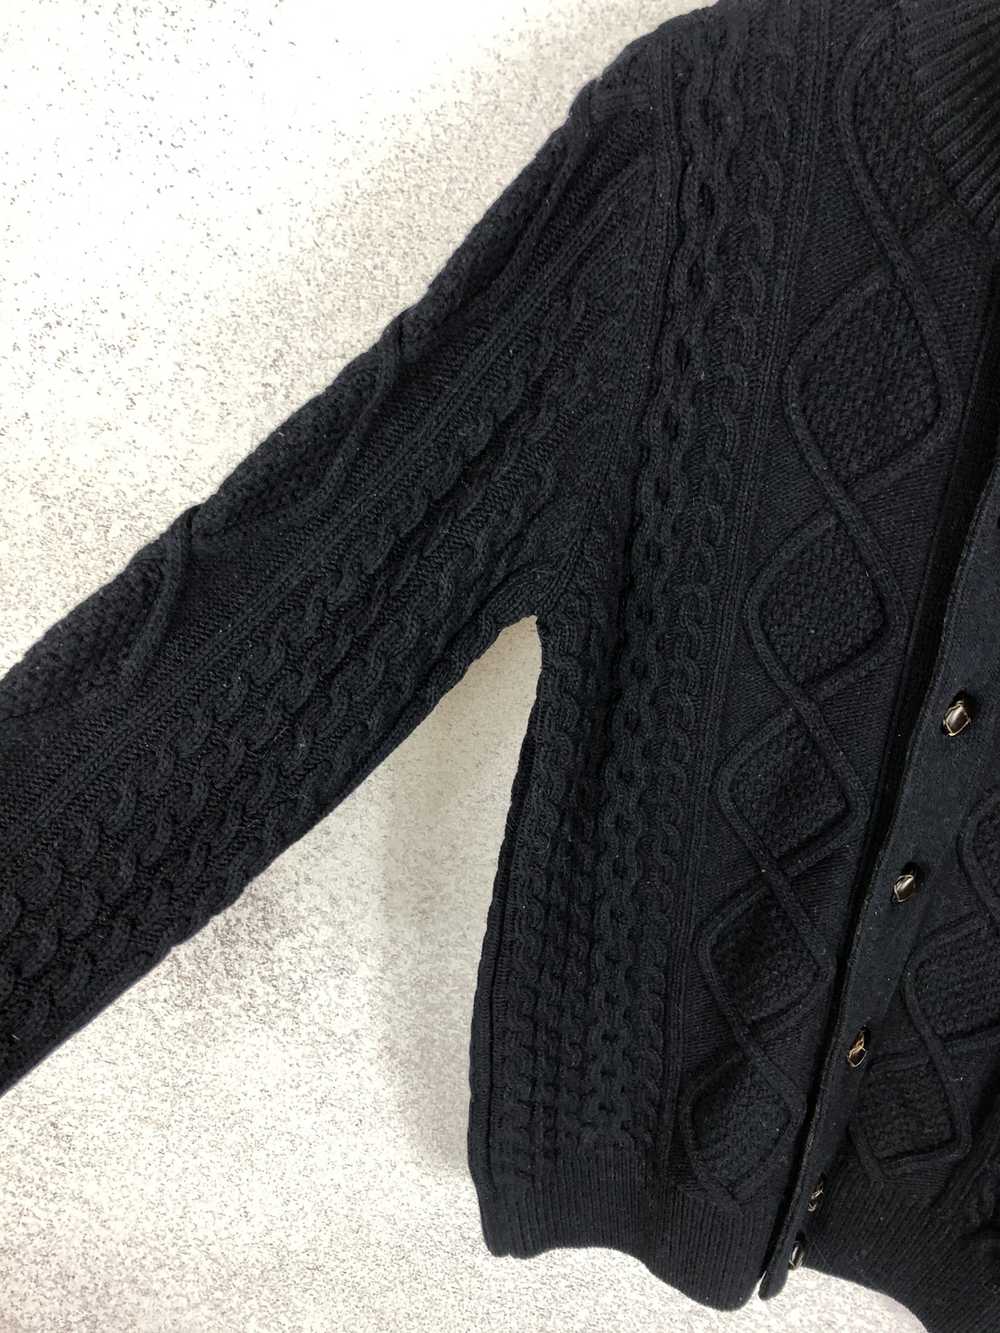 Barbour × Coloured Cable Knit Sweater Vintage Bar… - image 6